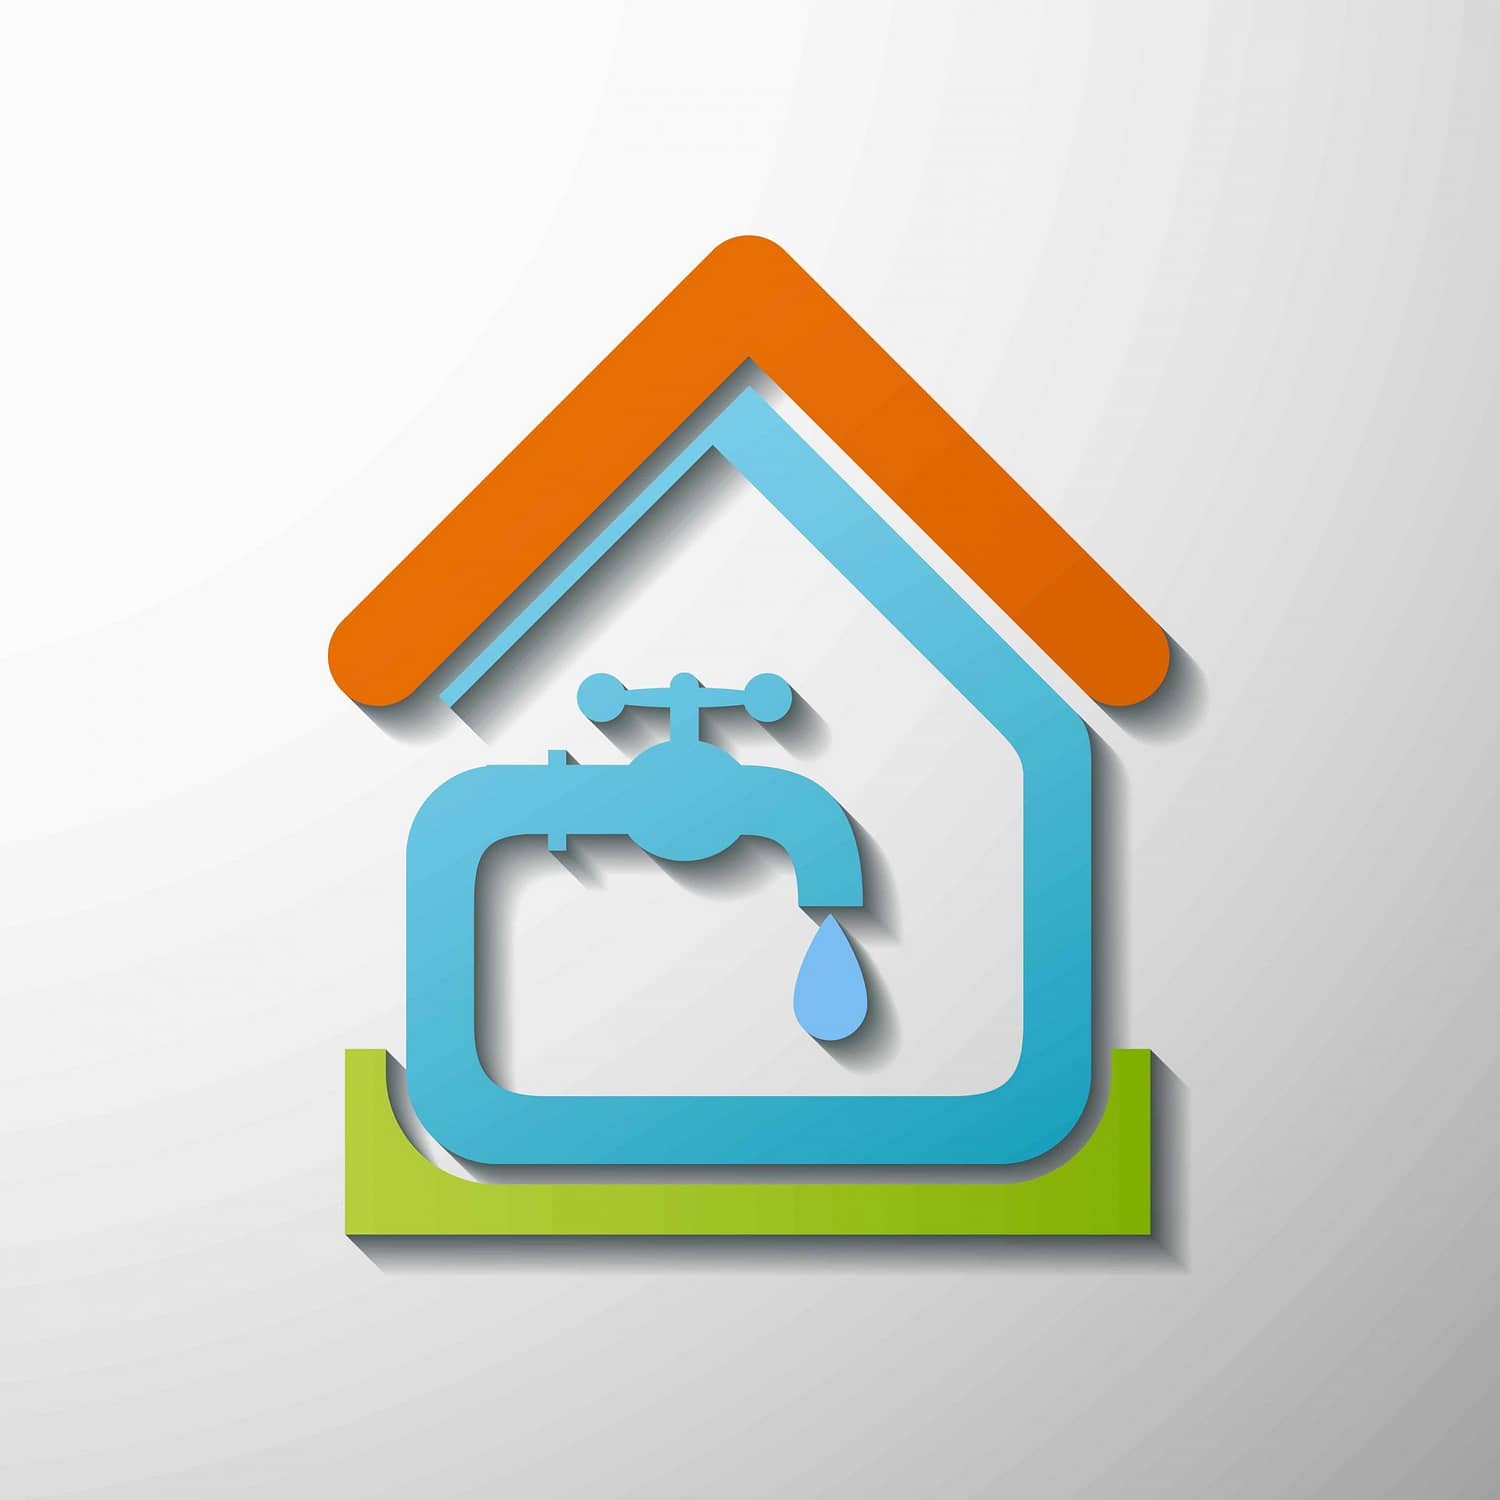 Illustration of a house and water tap